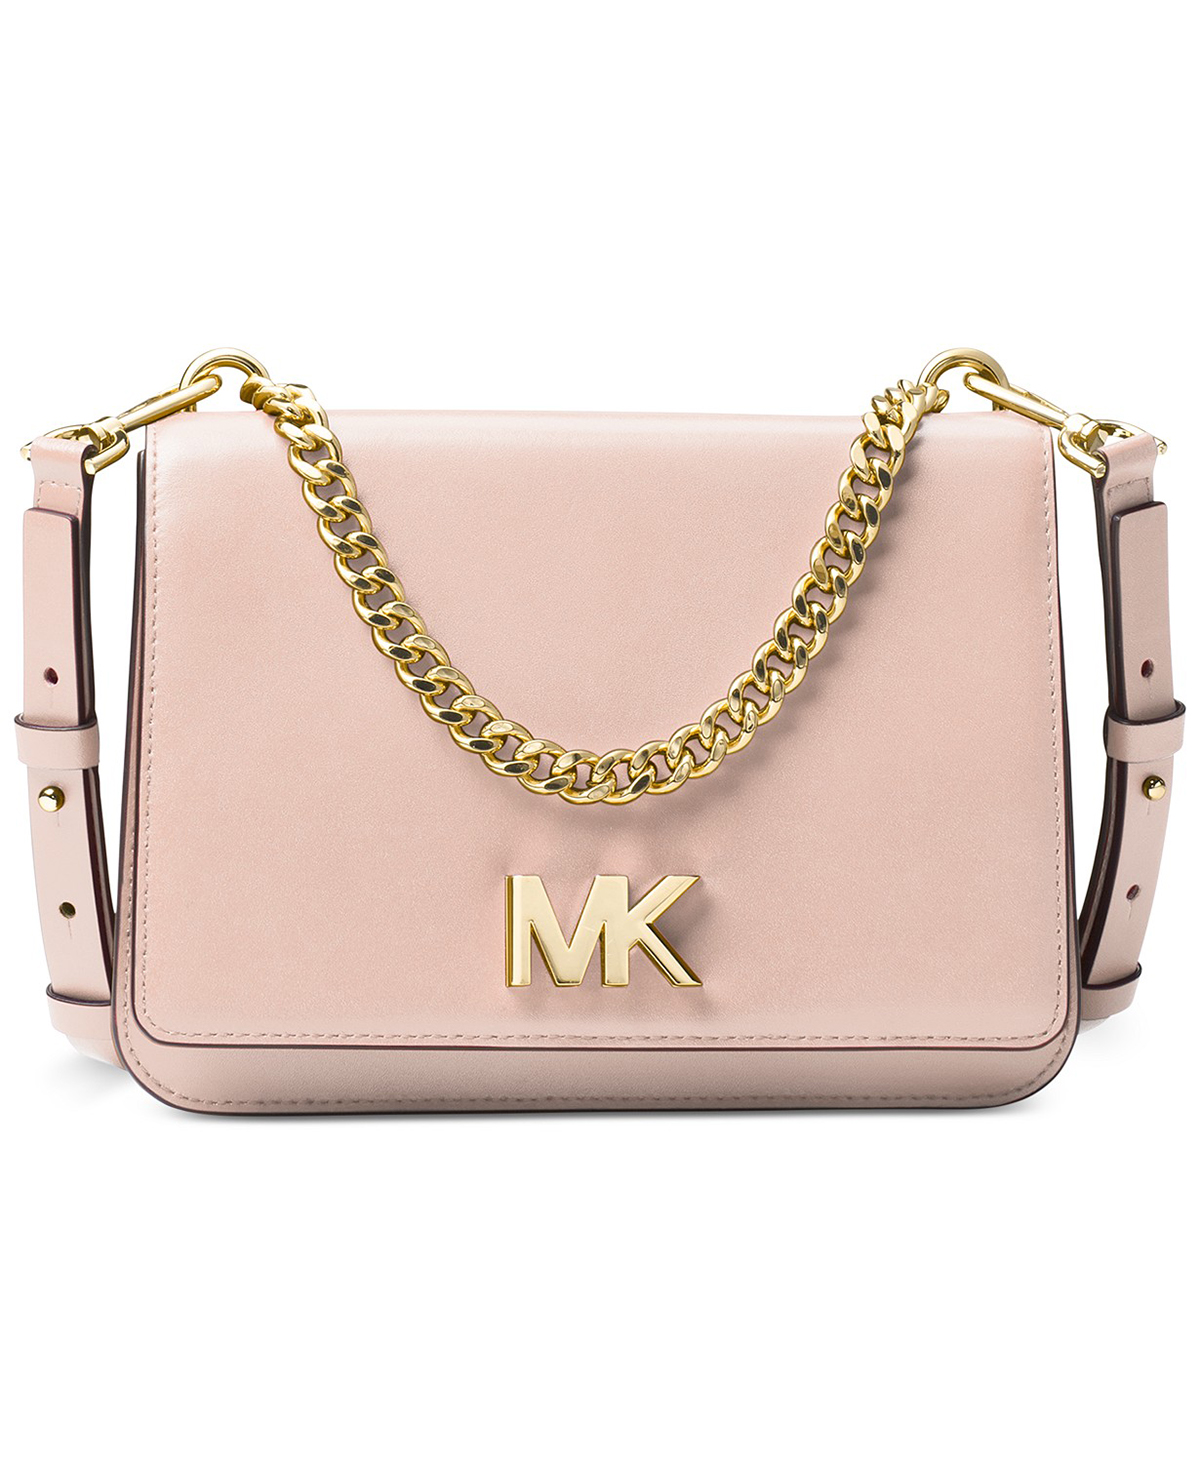 We Found a Chic Michael Kors Crossbody for Spring on Sale